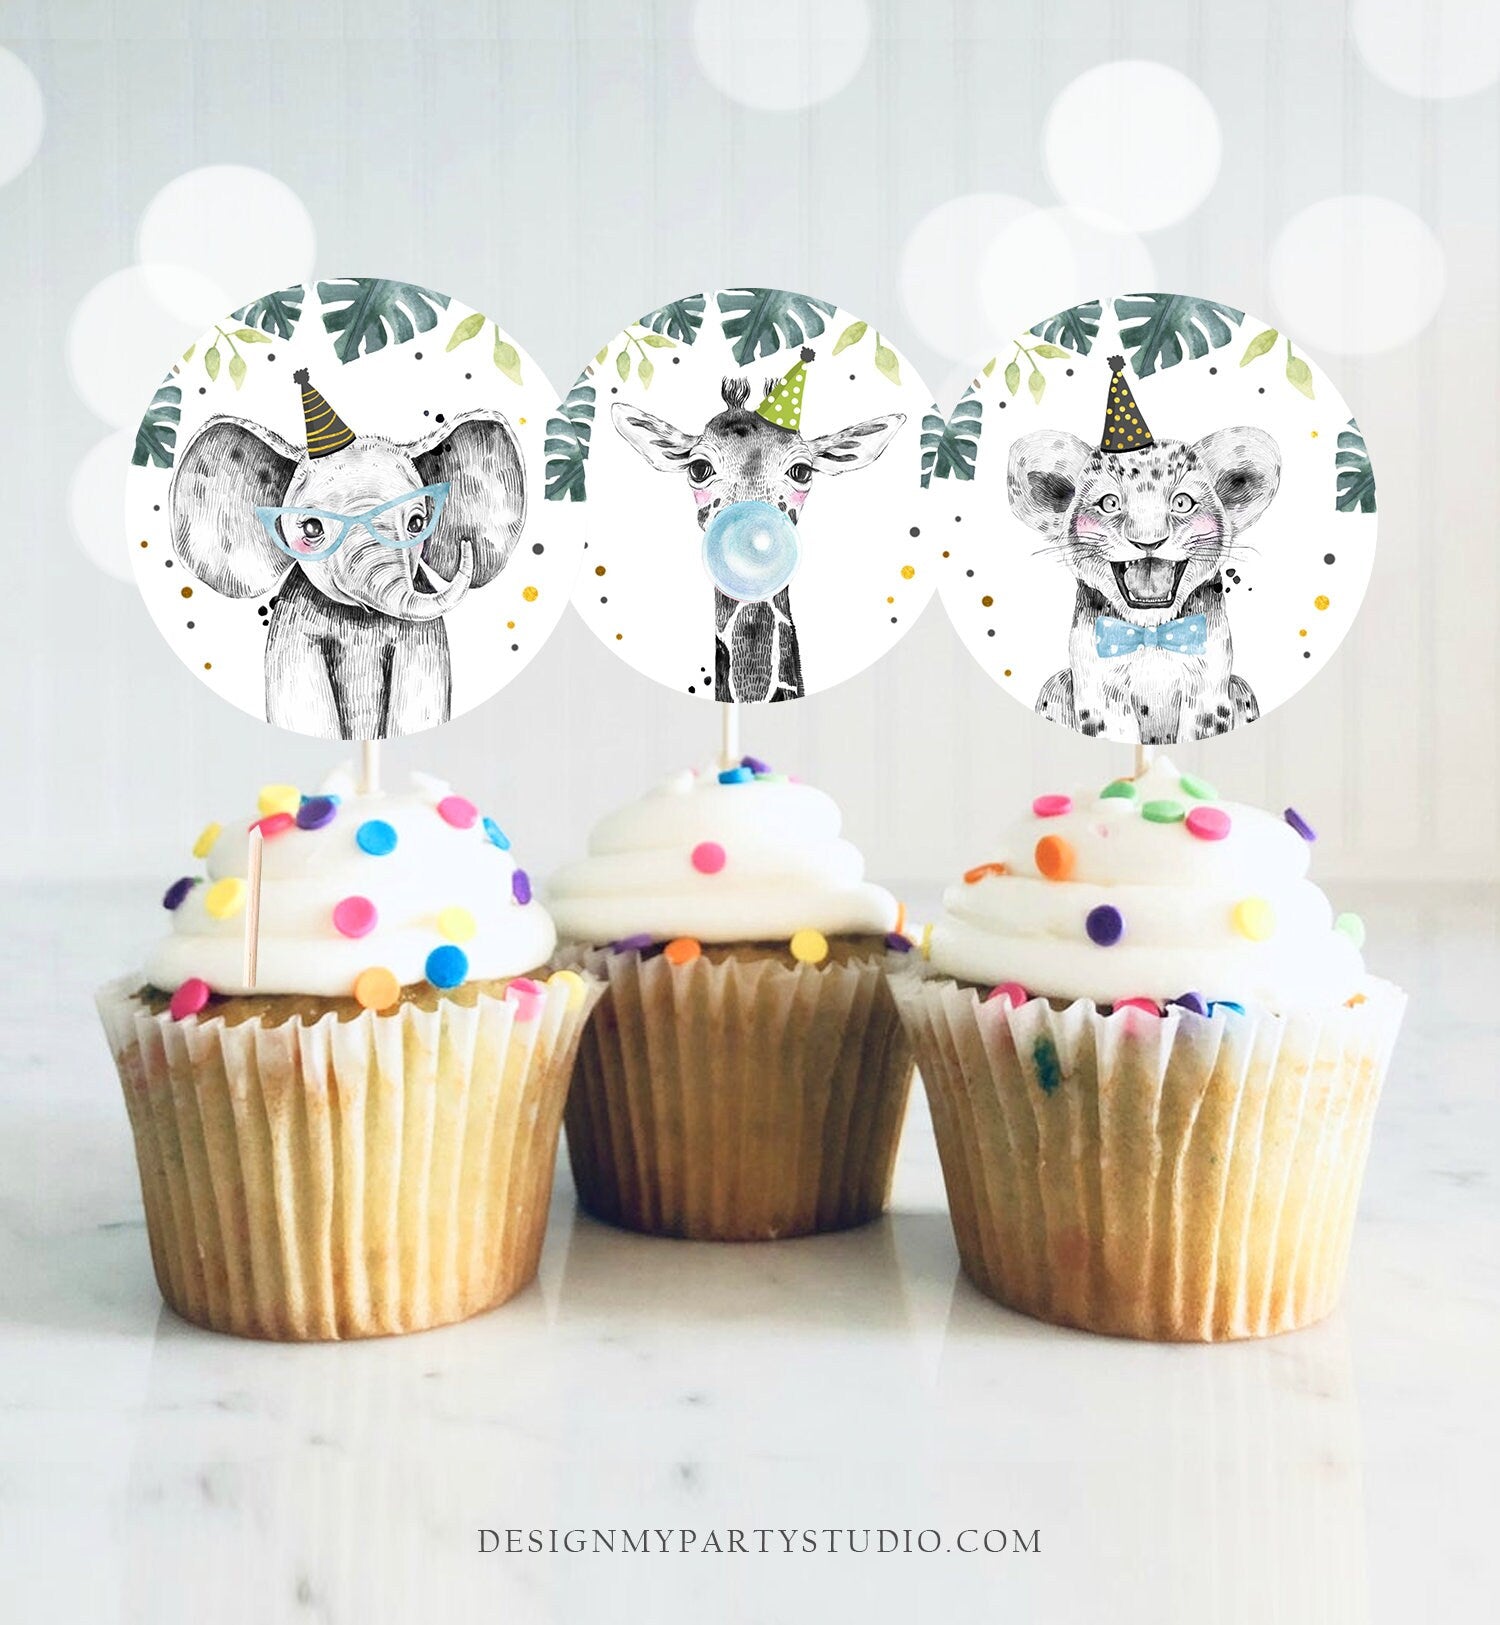 Party Animals Cupcake Toppers Favor Tags Birthday Party Decor Safari Animals Zoo Boy Wild One Green Gold Download Digital PRINTABLE 0322